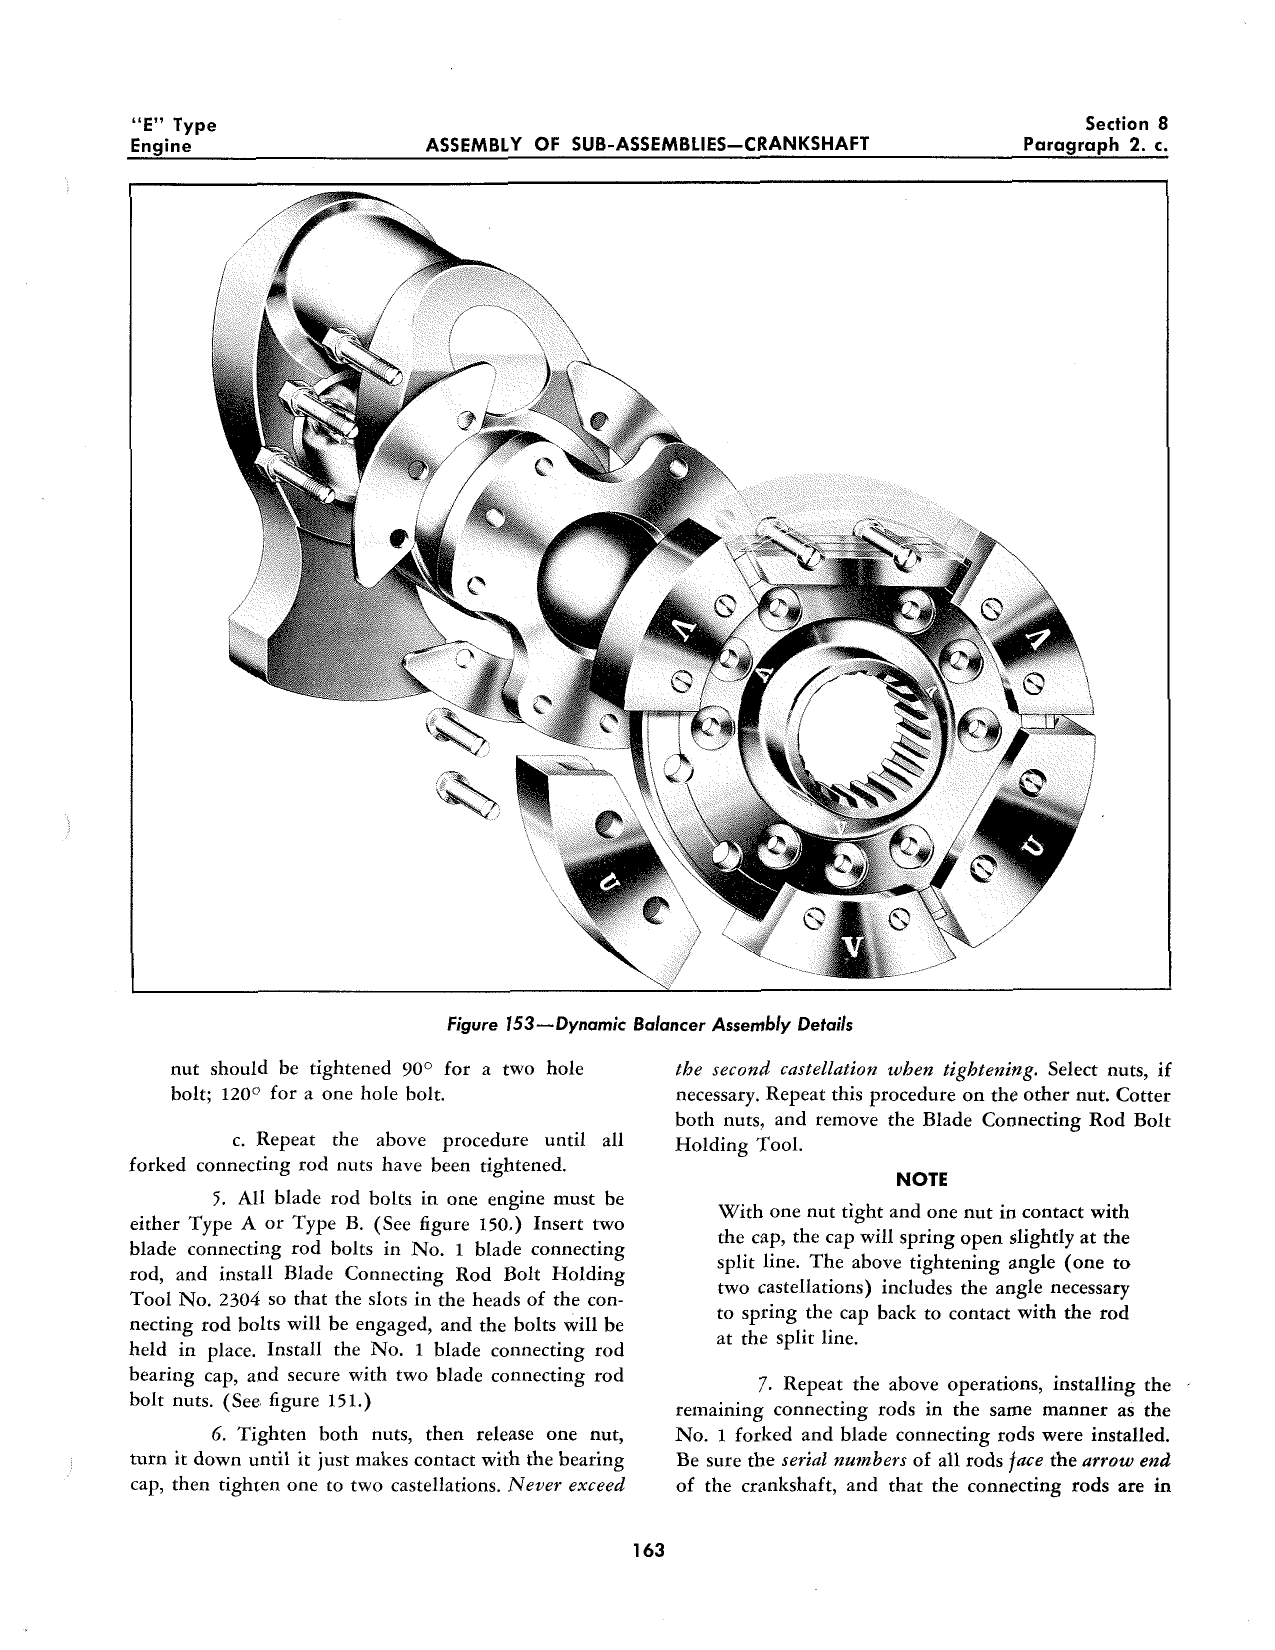 Sample page 168 from AirCorps Library document: Overhaul Manual - Allison V-1710-E Engine